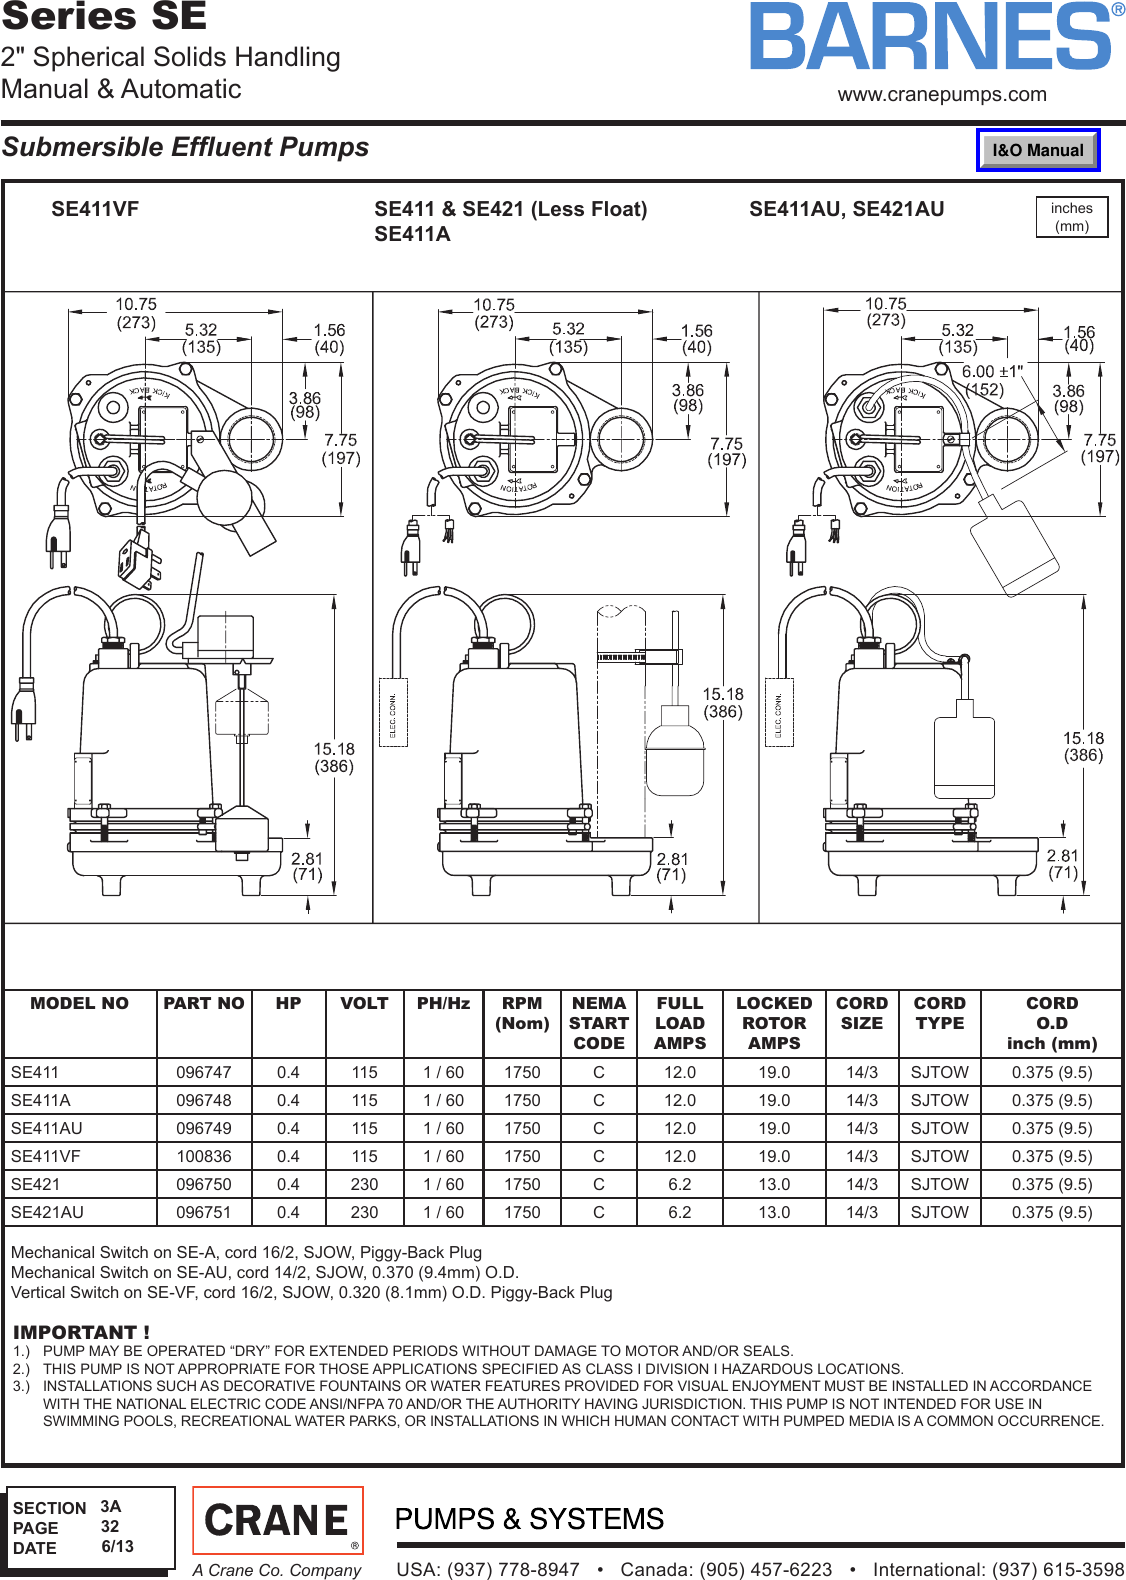 Page 2 of 3 - 534520 1 Barnes Se Series Submittal Sec-3a User Manual